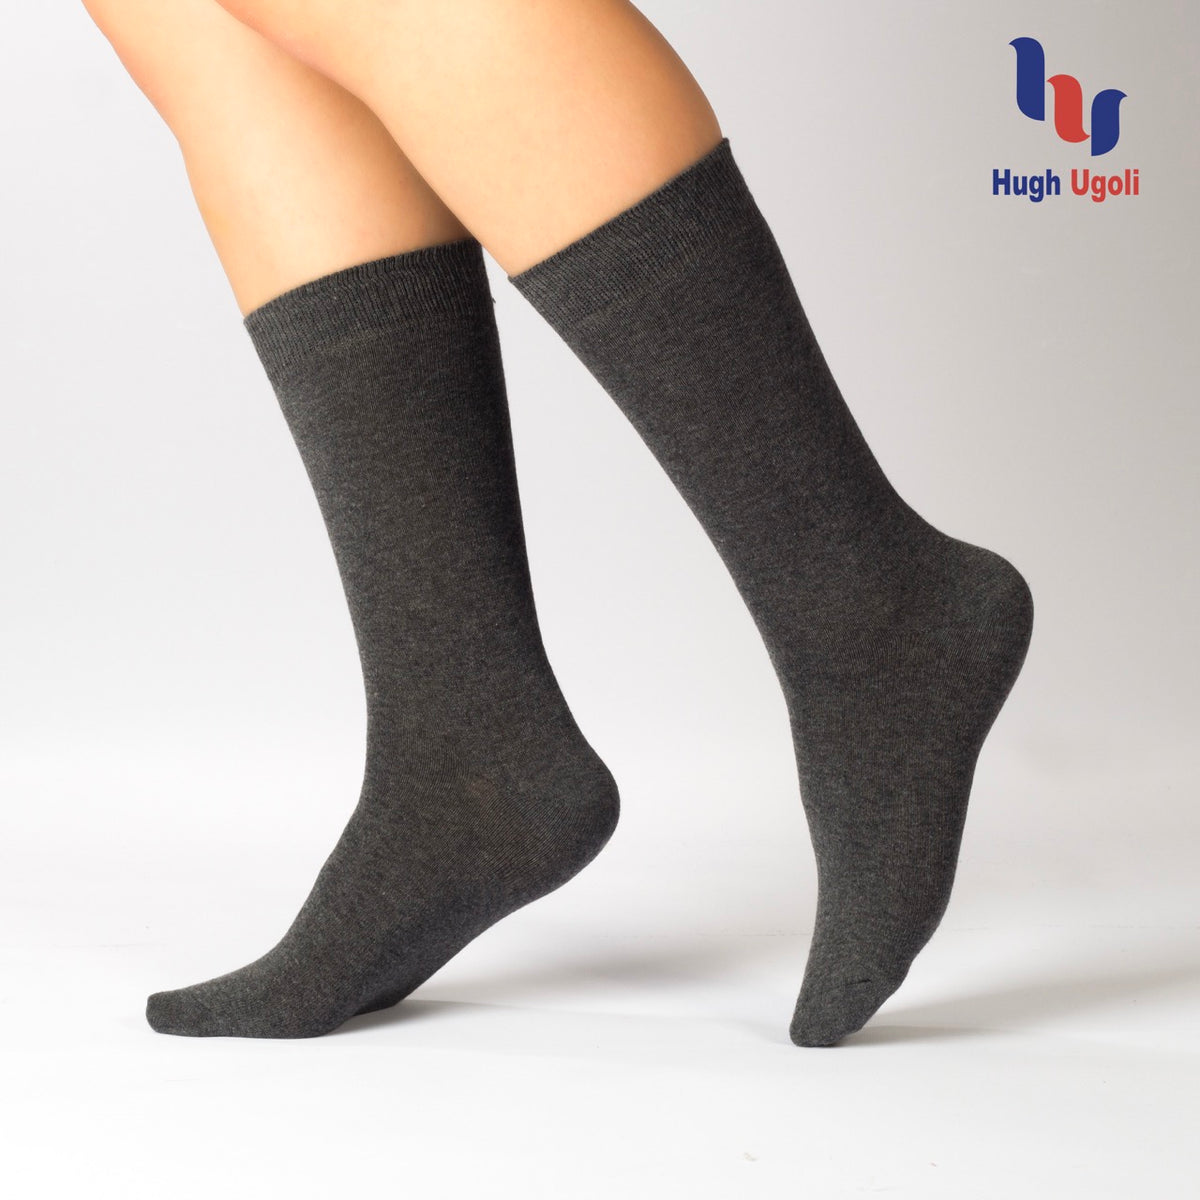 These Casual Cotton Dress Crew Socks feature "hugli" on the legs of a woman, adding a touch of personality to any outfit.